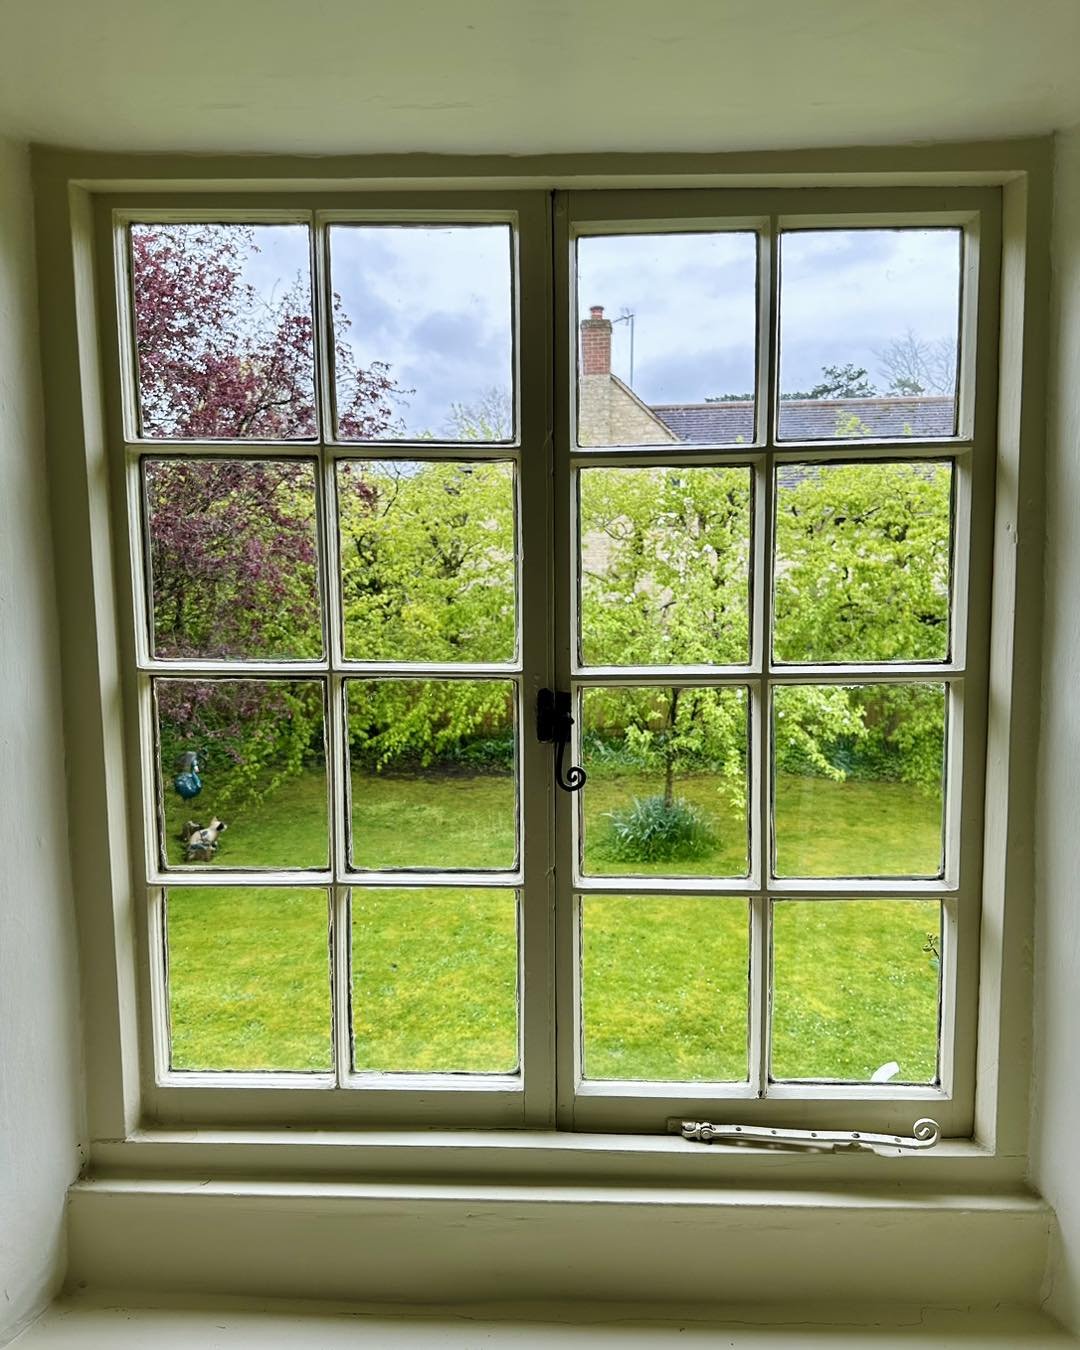 Yesterday we were hard at work taking incredibly gentle care of these original metal and wooden Georgian windows. Beautiful detail and craftsmanship requires a soft touch and the right tools. We removed all the paint splashes from the re painting and